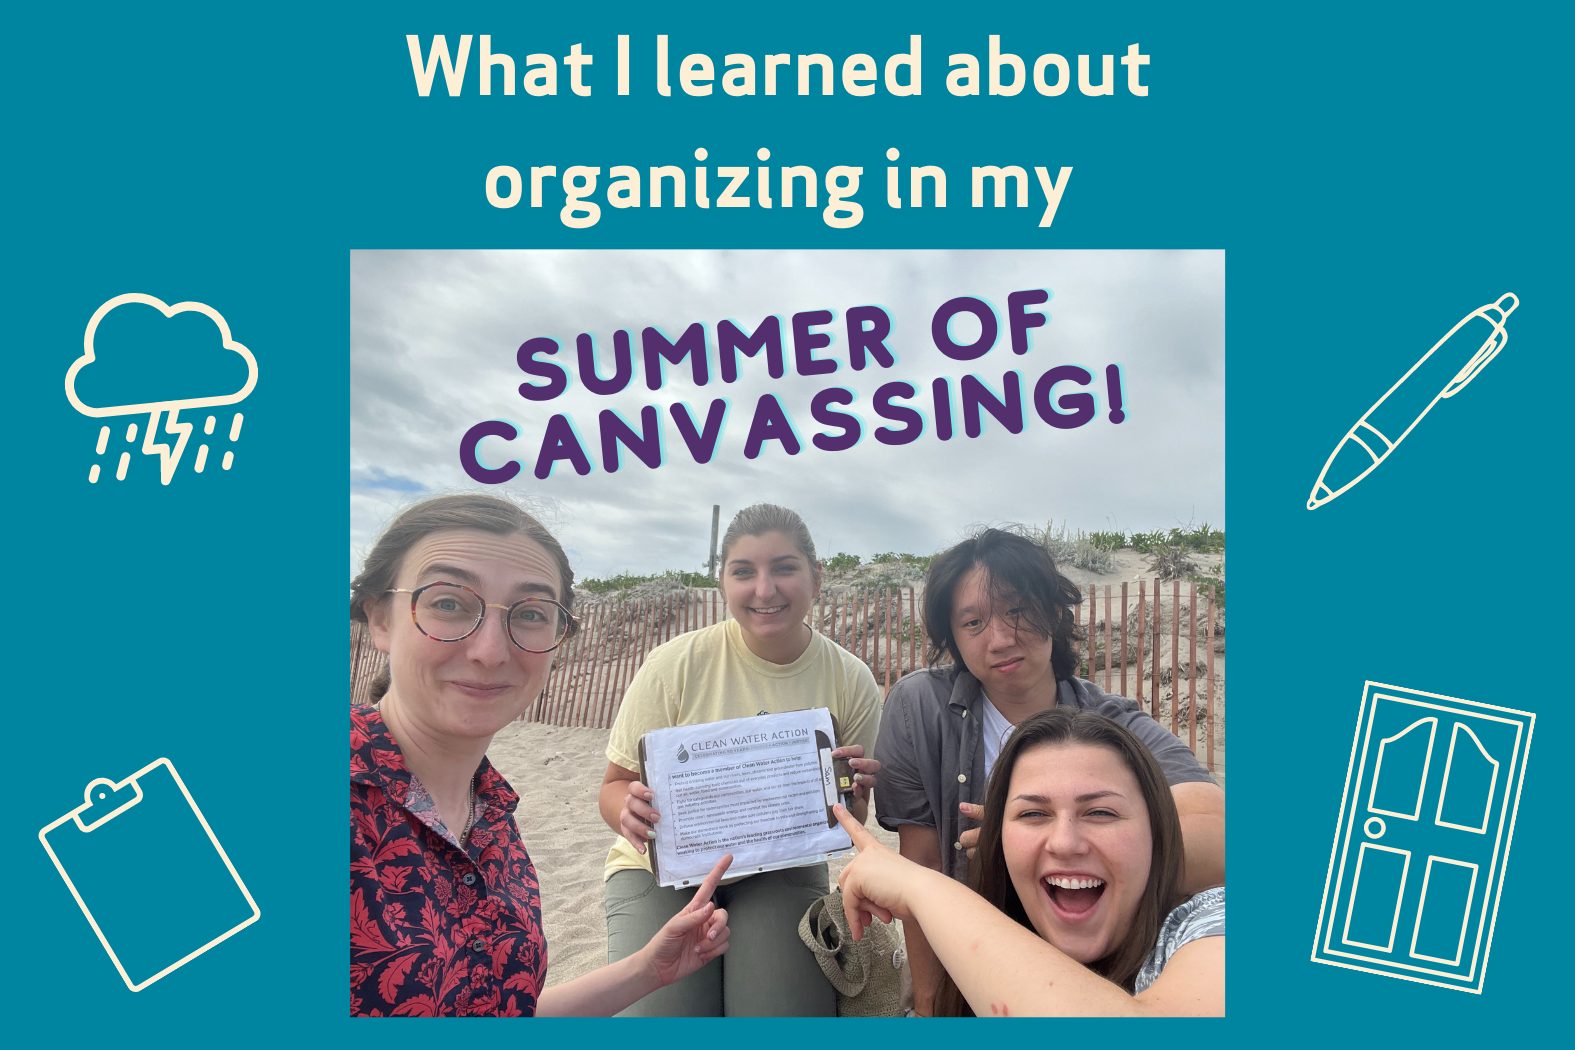 Image of Clean Water Action Rhode Island Canvassers with text "What I learned about organizing in my summer of canvassing!"